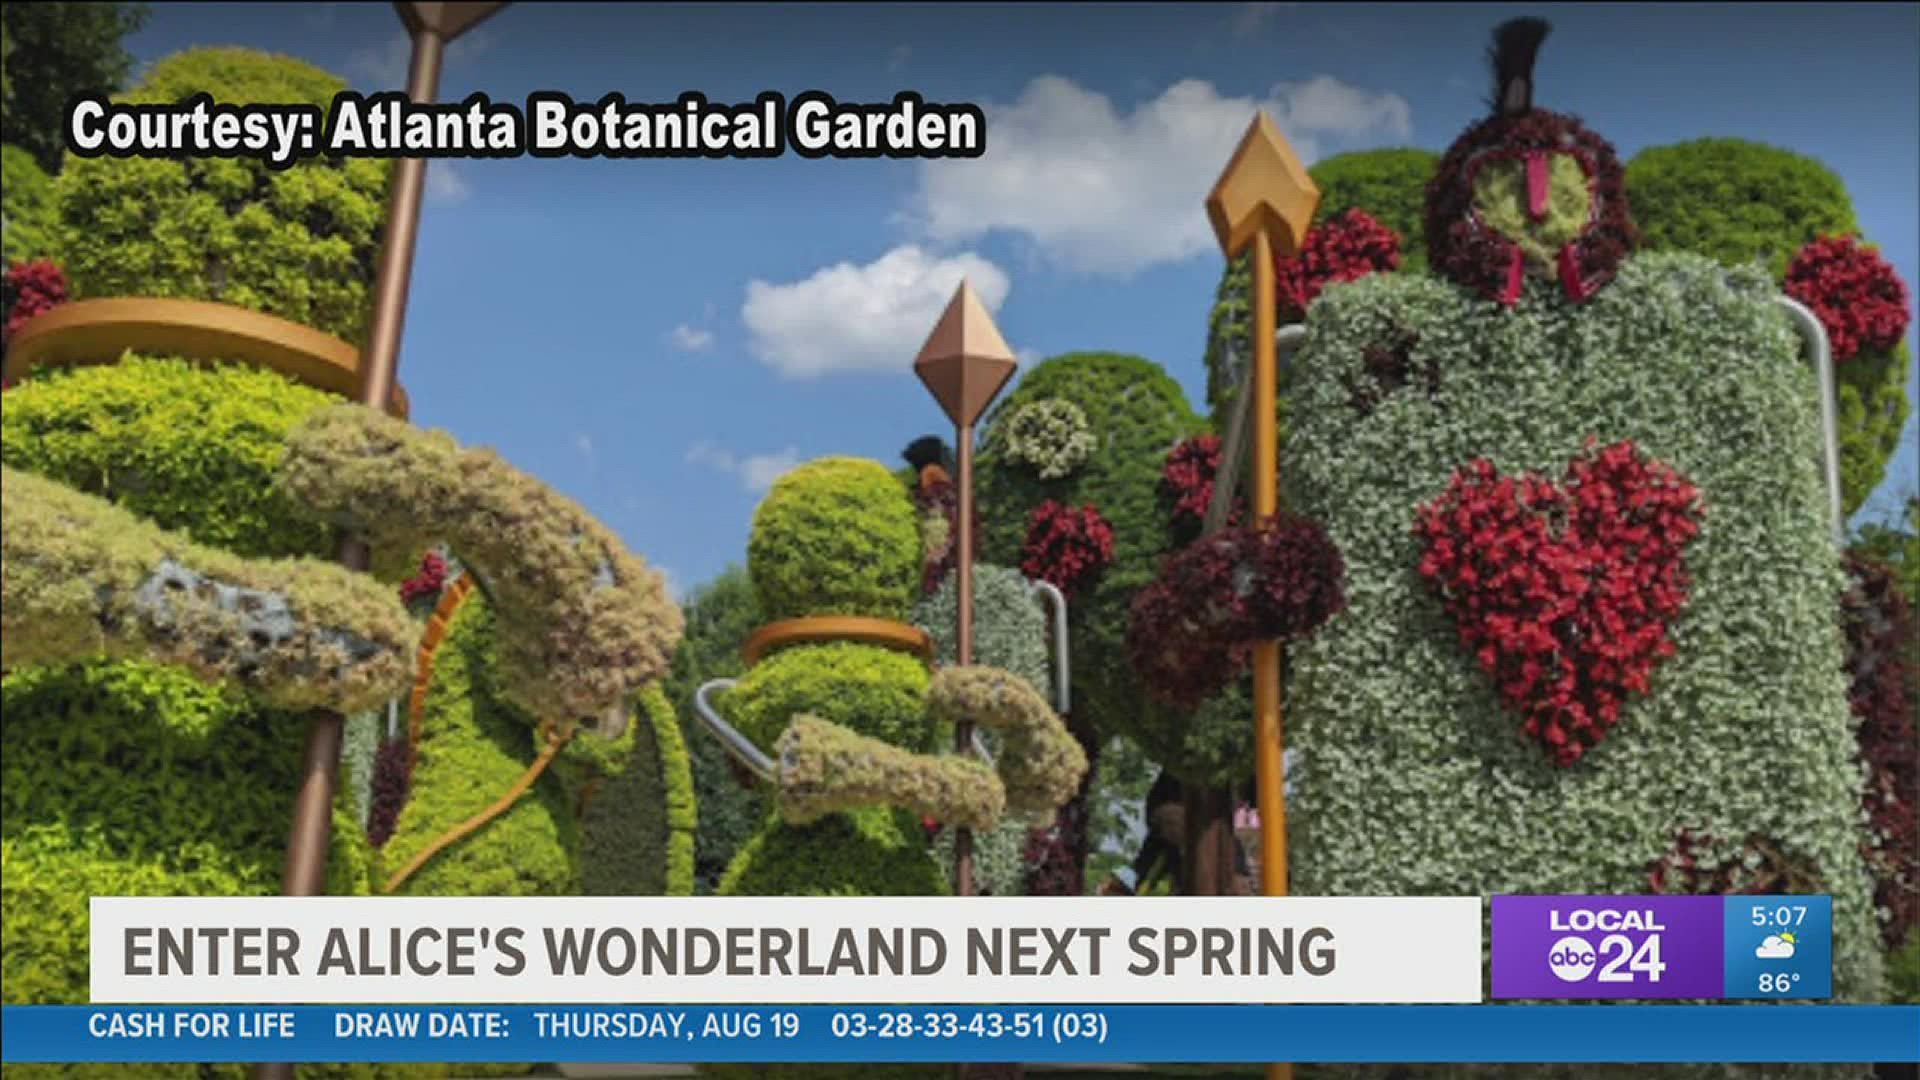 Alice in Wonderland comes to life in the new exhibit coming to the Memphis Botanic Garden in Spring 2022.